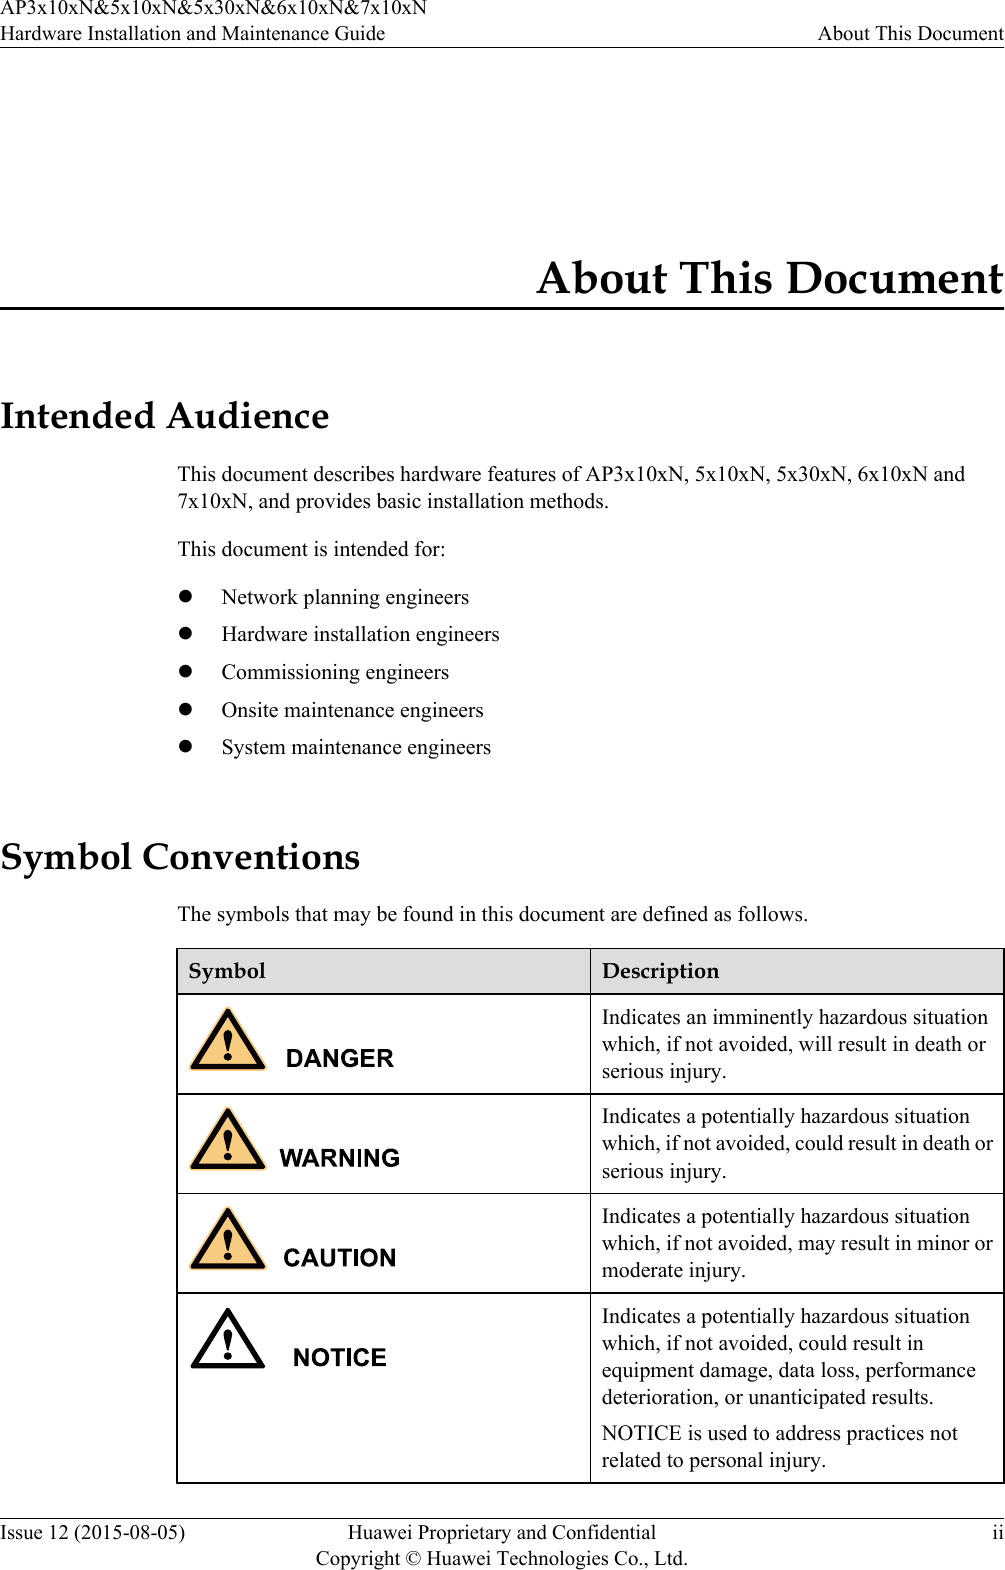 About This DocumentIntended AudienceThis document describes hardware features of AP3x10xN, 5x10xN, 5x30xN, 6x10xN and7x10xN, and provides basic installation methods.This document is intended for:lNetwork planning engineerslHardware installation engineerslCommissioning engineerslOnsite maintenance engineerslSystem maintenance engineersSymbol ConventionsThe symbols that may be found in this document are defined as follows.Symbol DescriptionIndicates an imminently hazardous situationwhich, if not avoided, will result in death orserious injury.Indicates a potentially hazardous situationwhich, if not avoided, could result in death orserious injury.Indicates a potentially hazardous situationwhich, if not avoided, may result in minor ormoderate injury.Indicates a potentially hazardous situationwhich, if not avoided, could result inequipment damage, data loss, performancedeterioration, or unanticipated results.NOTICE is used to address practices notrelated to personal injury.AP3x10xN&amp;5x10xN&amp;5x30xN&amp;6x10xN&amp;7x10xNHardware Installation and Maintenance Guide About This DocumentIssue 12 (2015-08-05) Huawei Proprietary and ConfidentialCopyright © Huawei Technologies Co., Ltd.ii